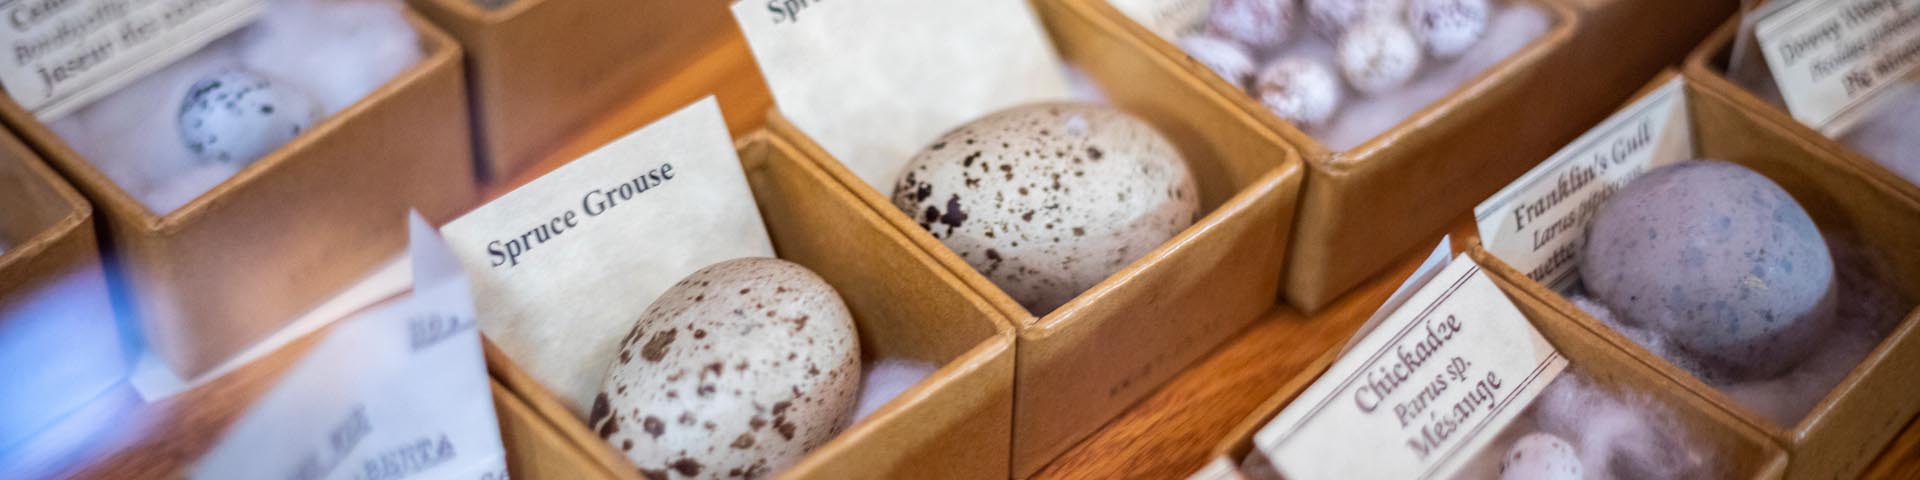 Bird eggs labeled and on a table